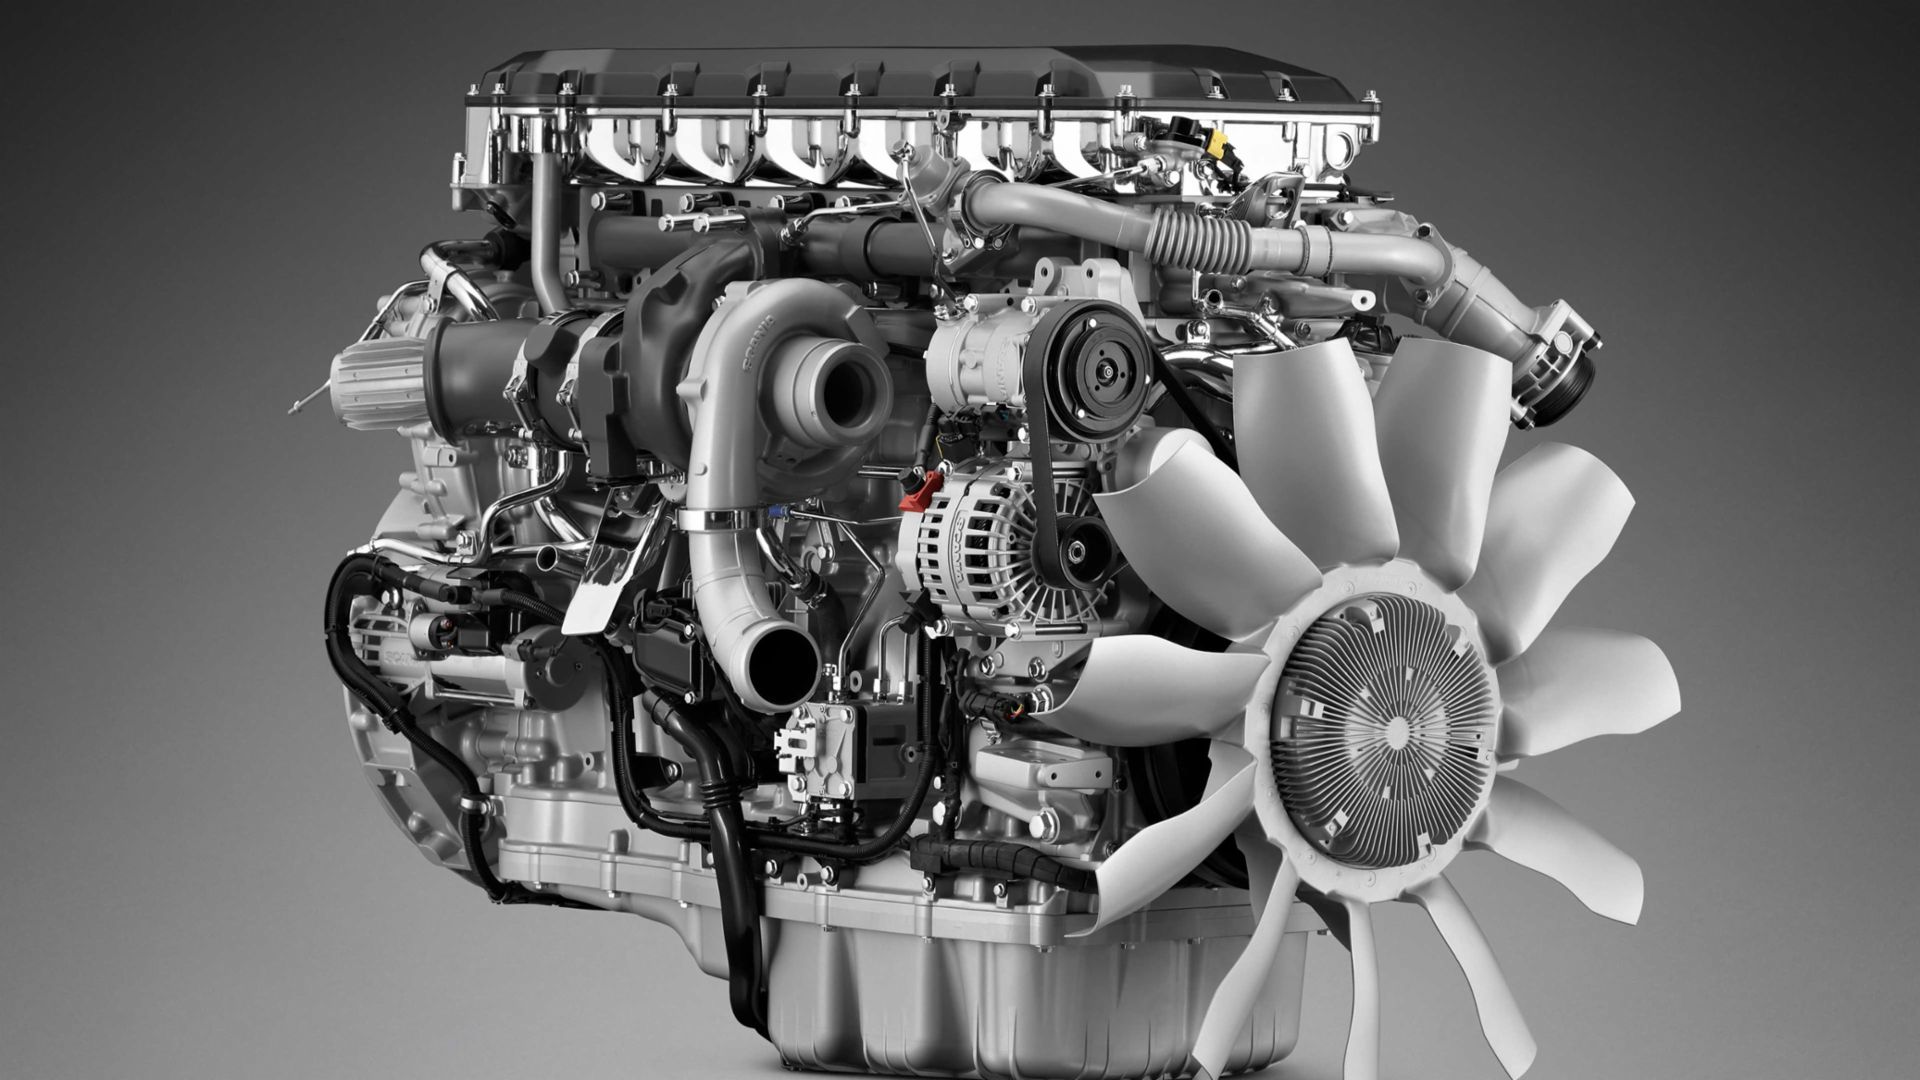 TRATON presents its first joint diesel engine for heavy-duty trucks.